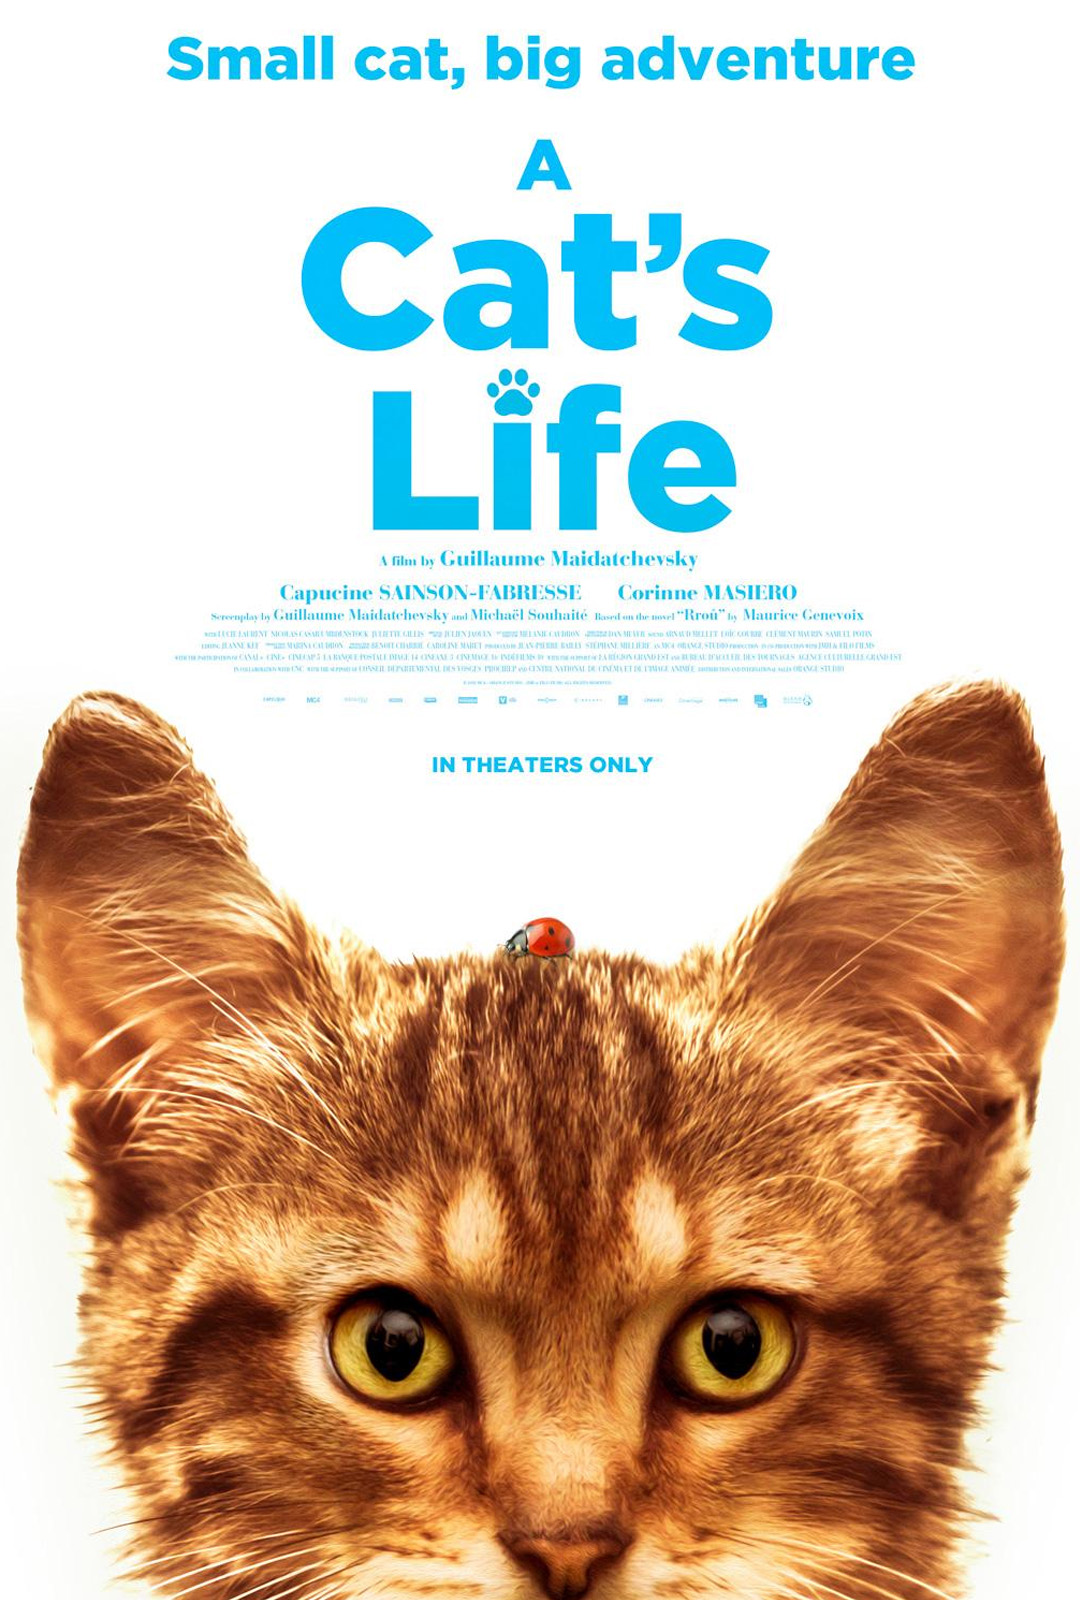 Movie Poster: A Cat's Life